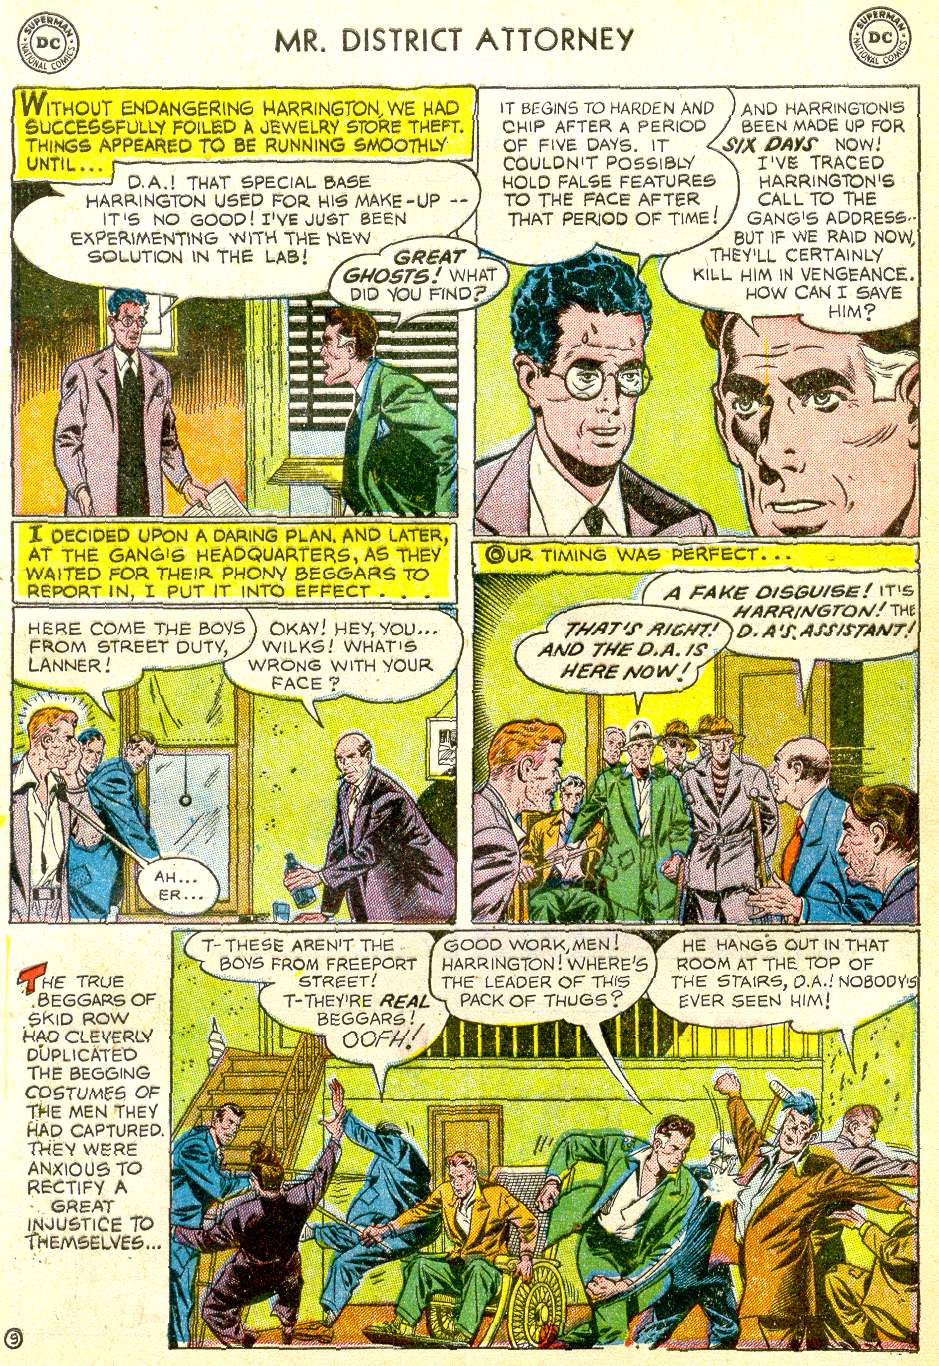 Read online Mr. District Attorney comic -  Issue #28 - 11